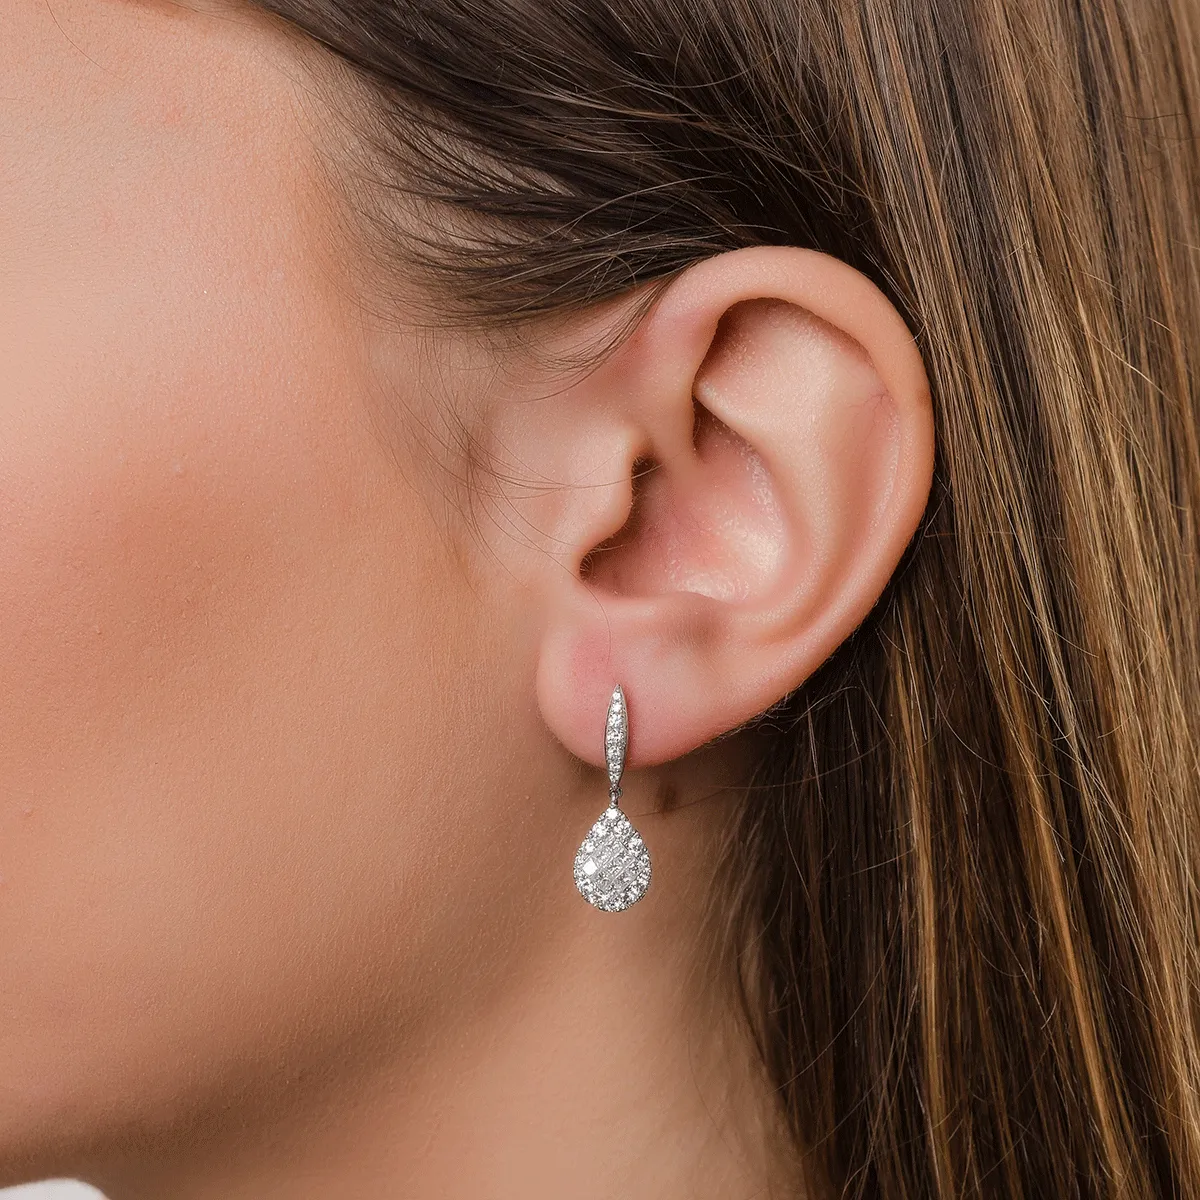 18K white gold earrings with 1.24ct diamonds